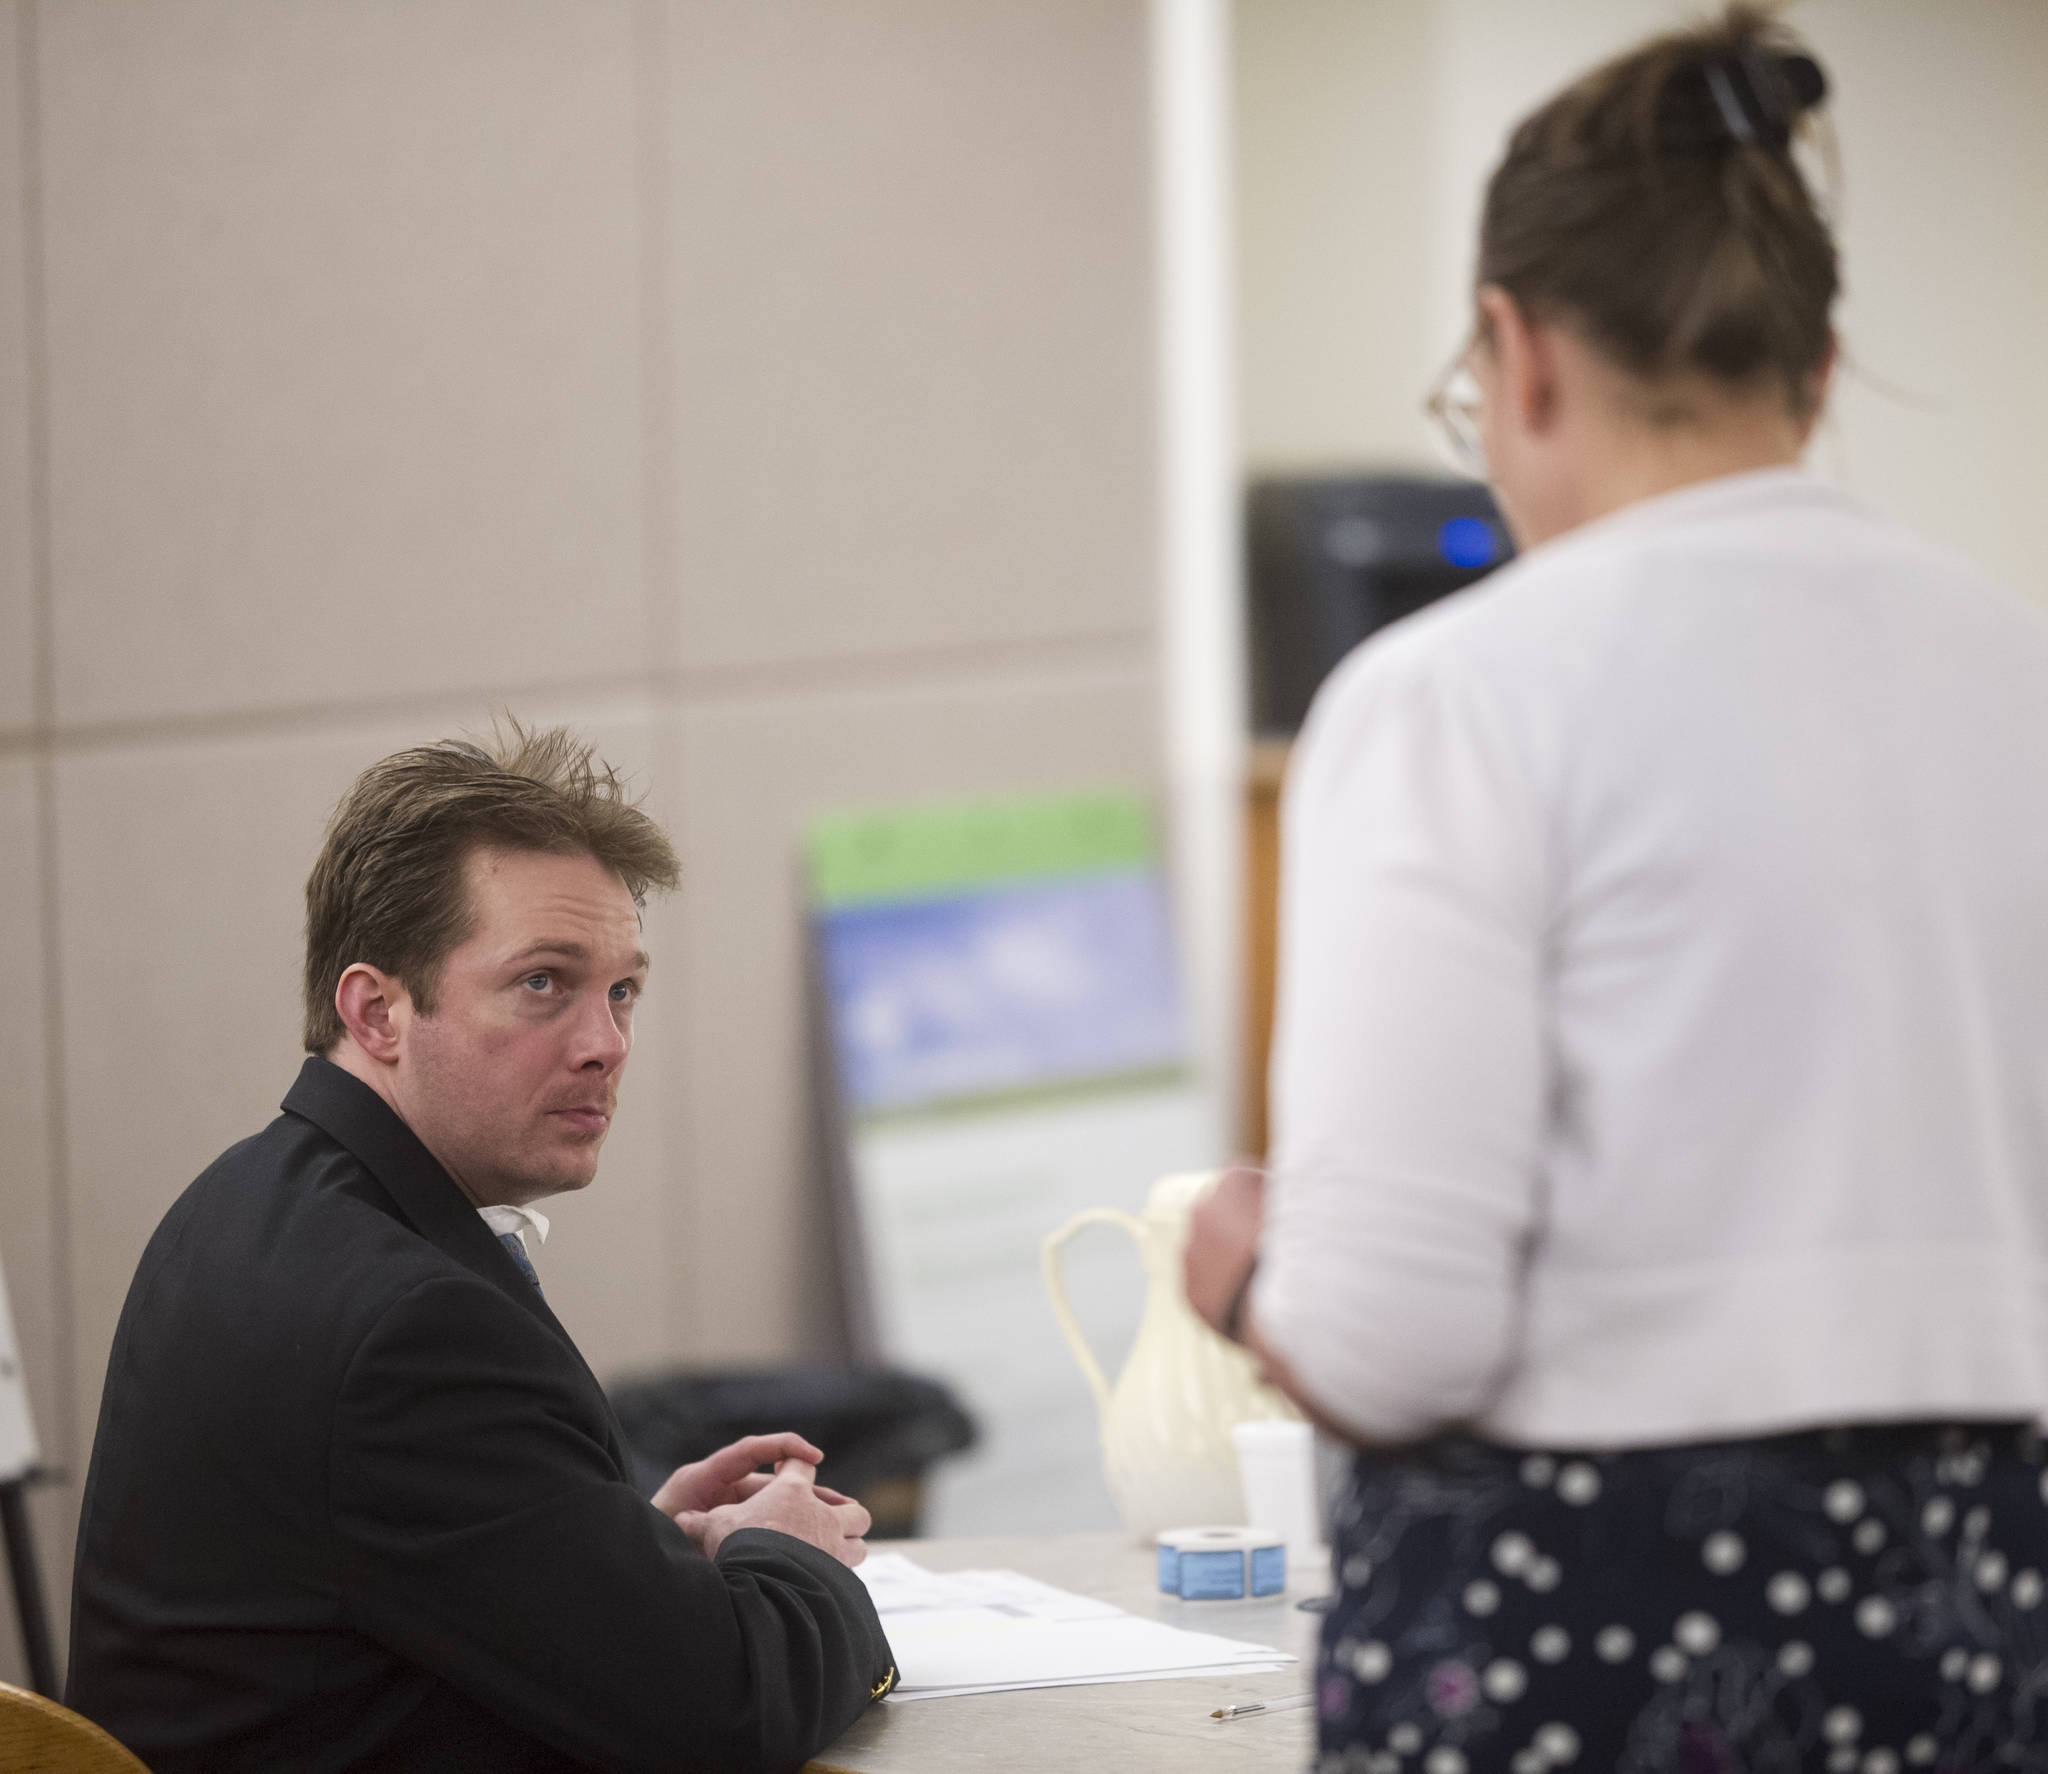 Christopher Strawn speaks with Juneau Assistant District Attorney Amy Paige at the start of his trial in Juneau Superior Court on Thursday, Oct. 5, 2017. Strawn, 34, faces charges of first-degree and second-degree murder, manslaughter, criminally negligent homicide, third-degree assault and weapons misconduct in the shooting death of Brandon Cook in October 2015. (Michael Penn | Juneau Empire)